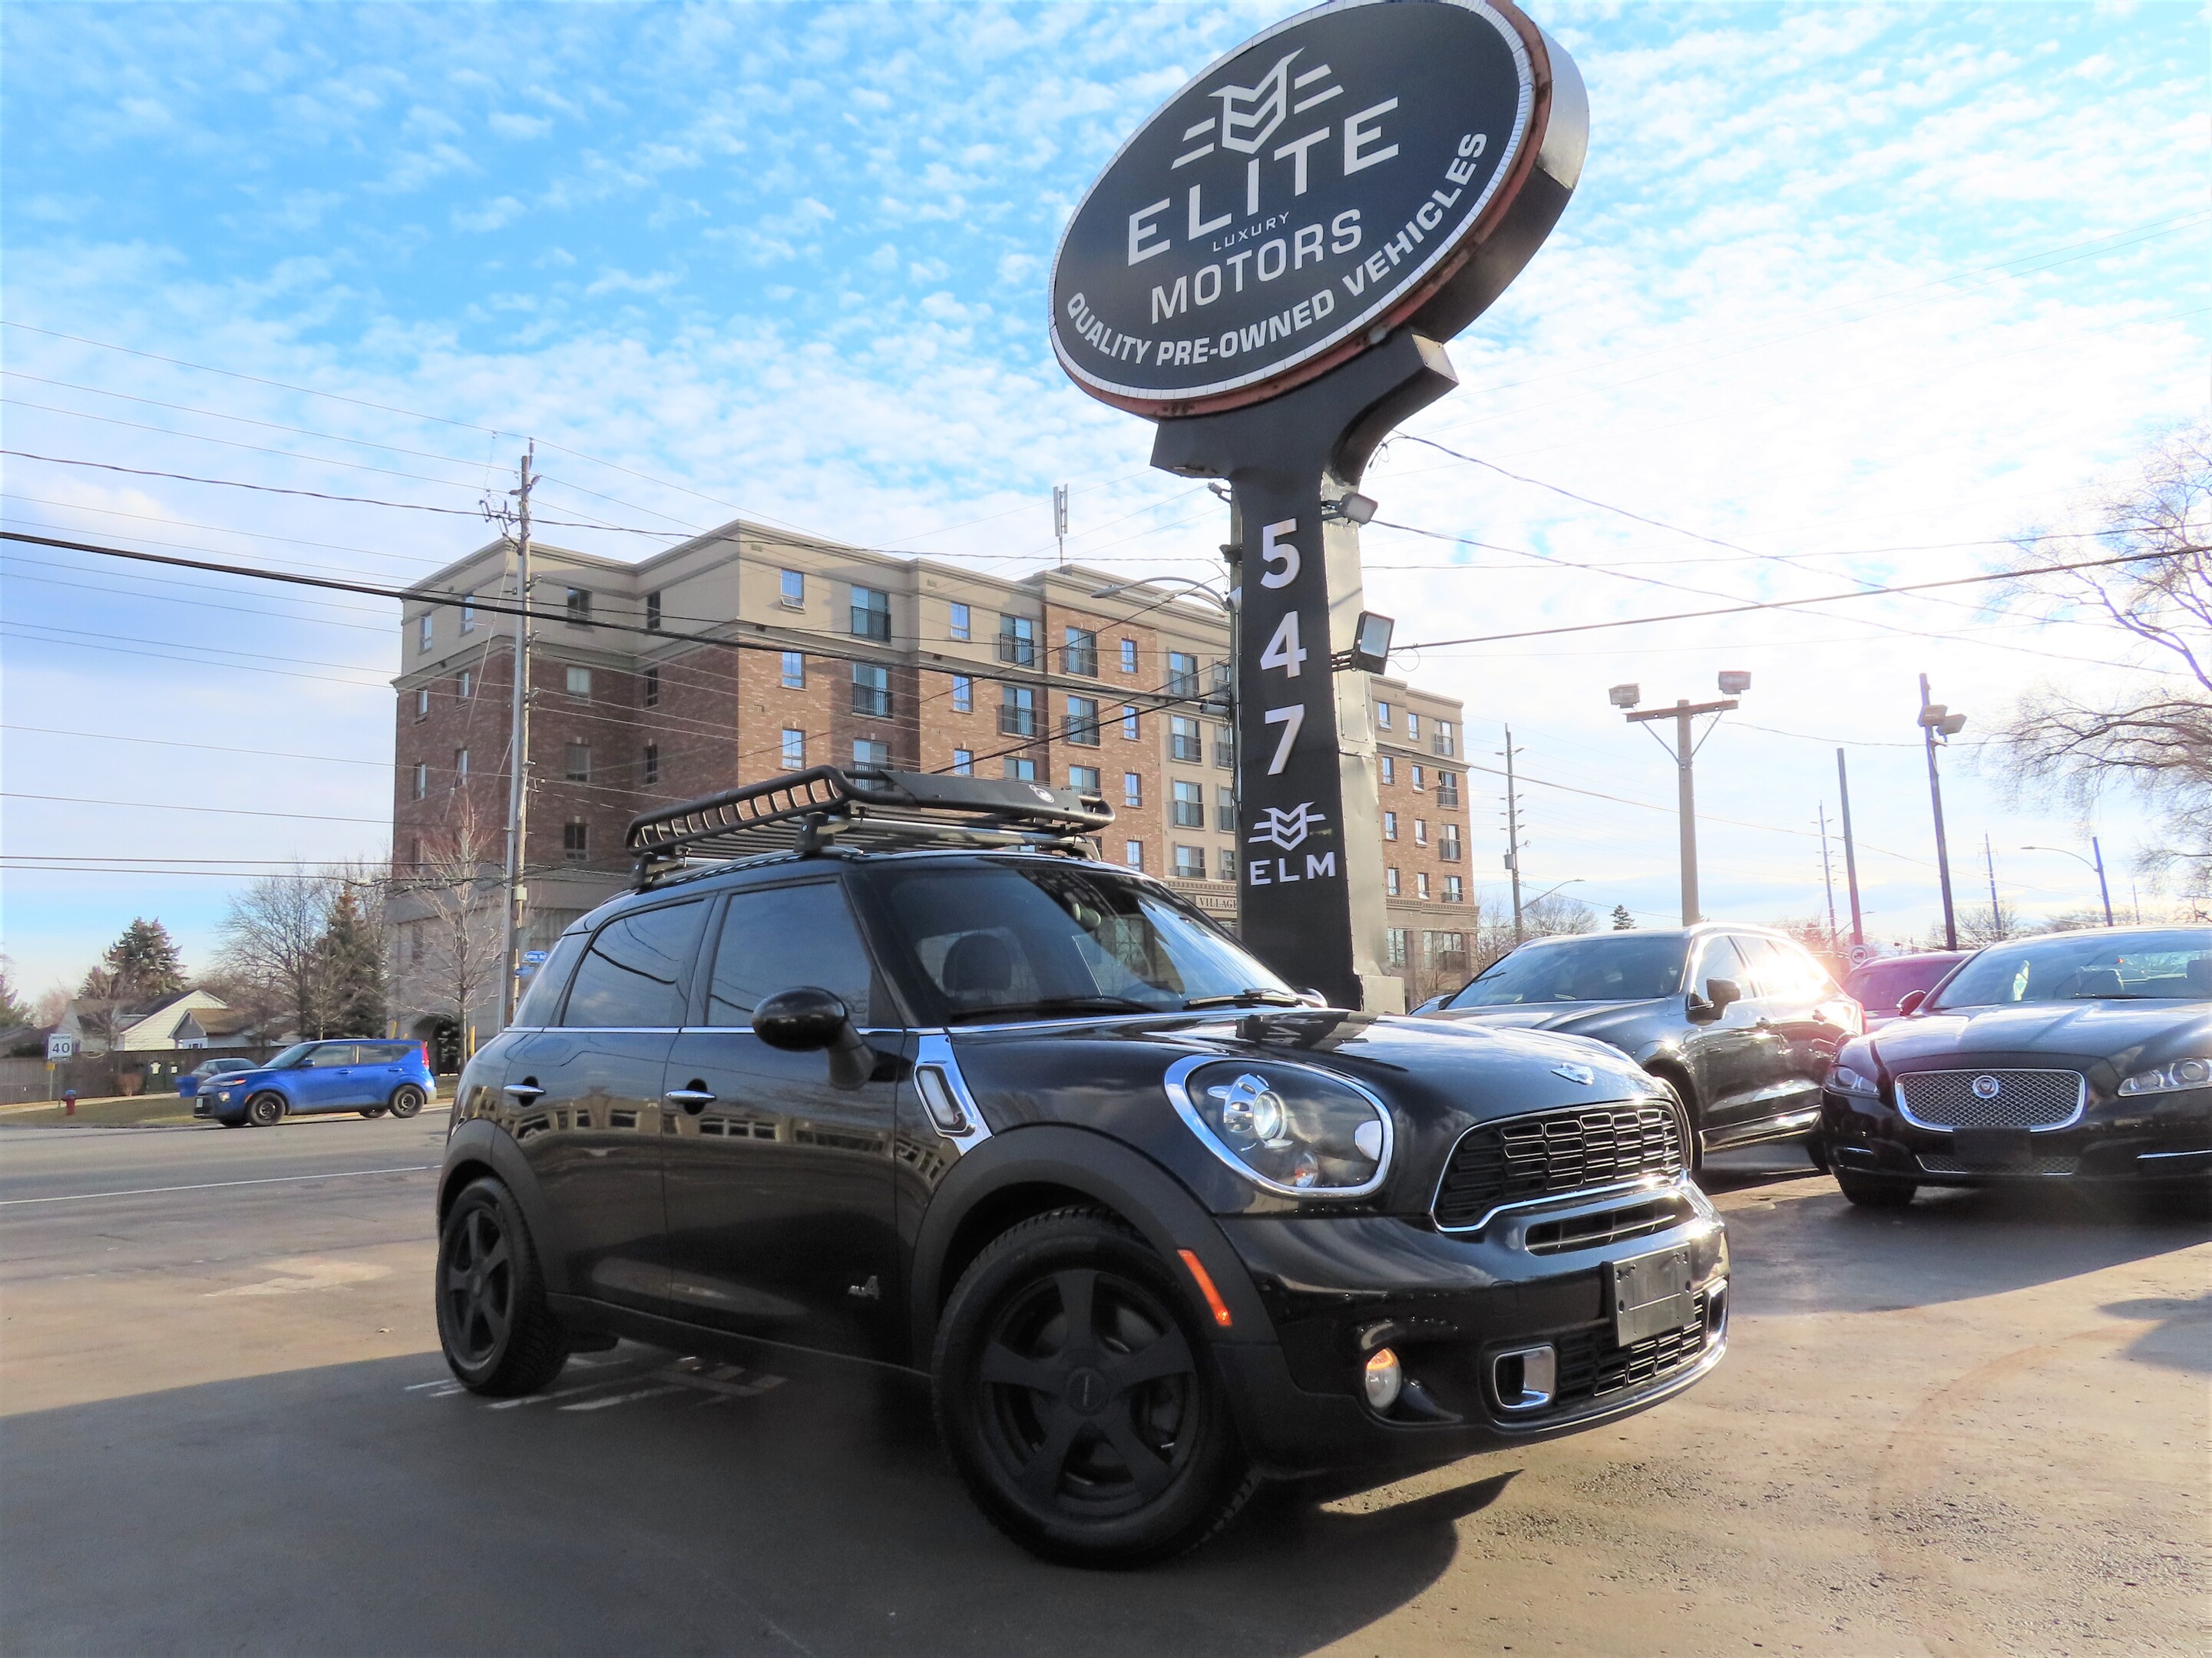 2013 MINI Cooper Countryman AWD S ALL4 - 6-SPEED - NAVIGATION - 55KMS !!